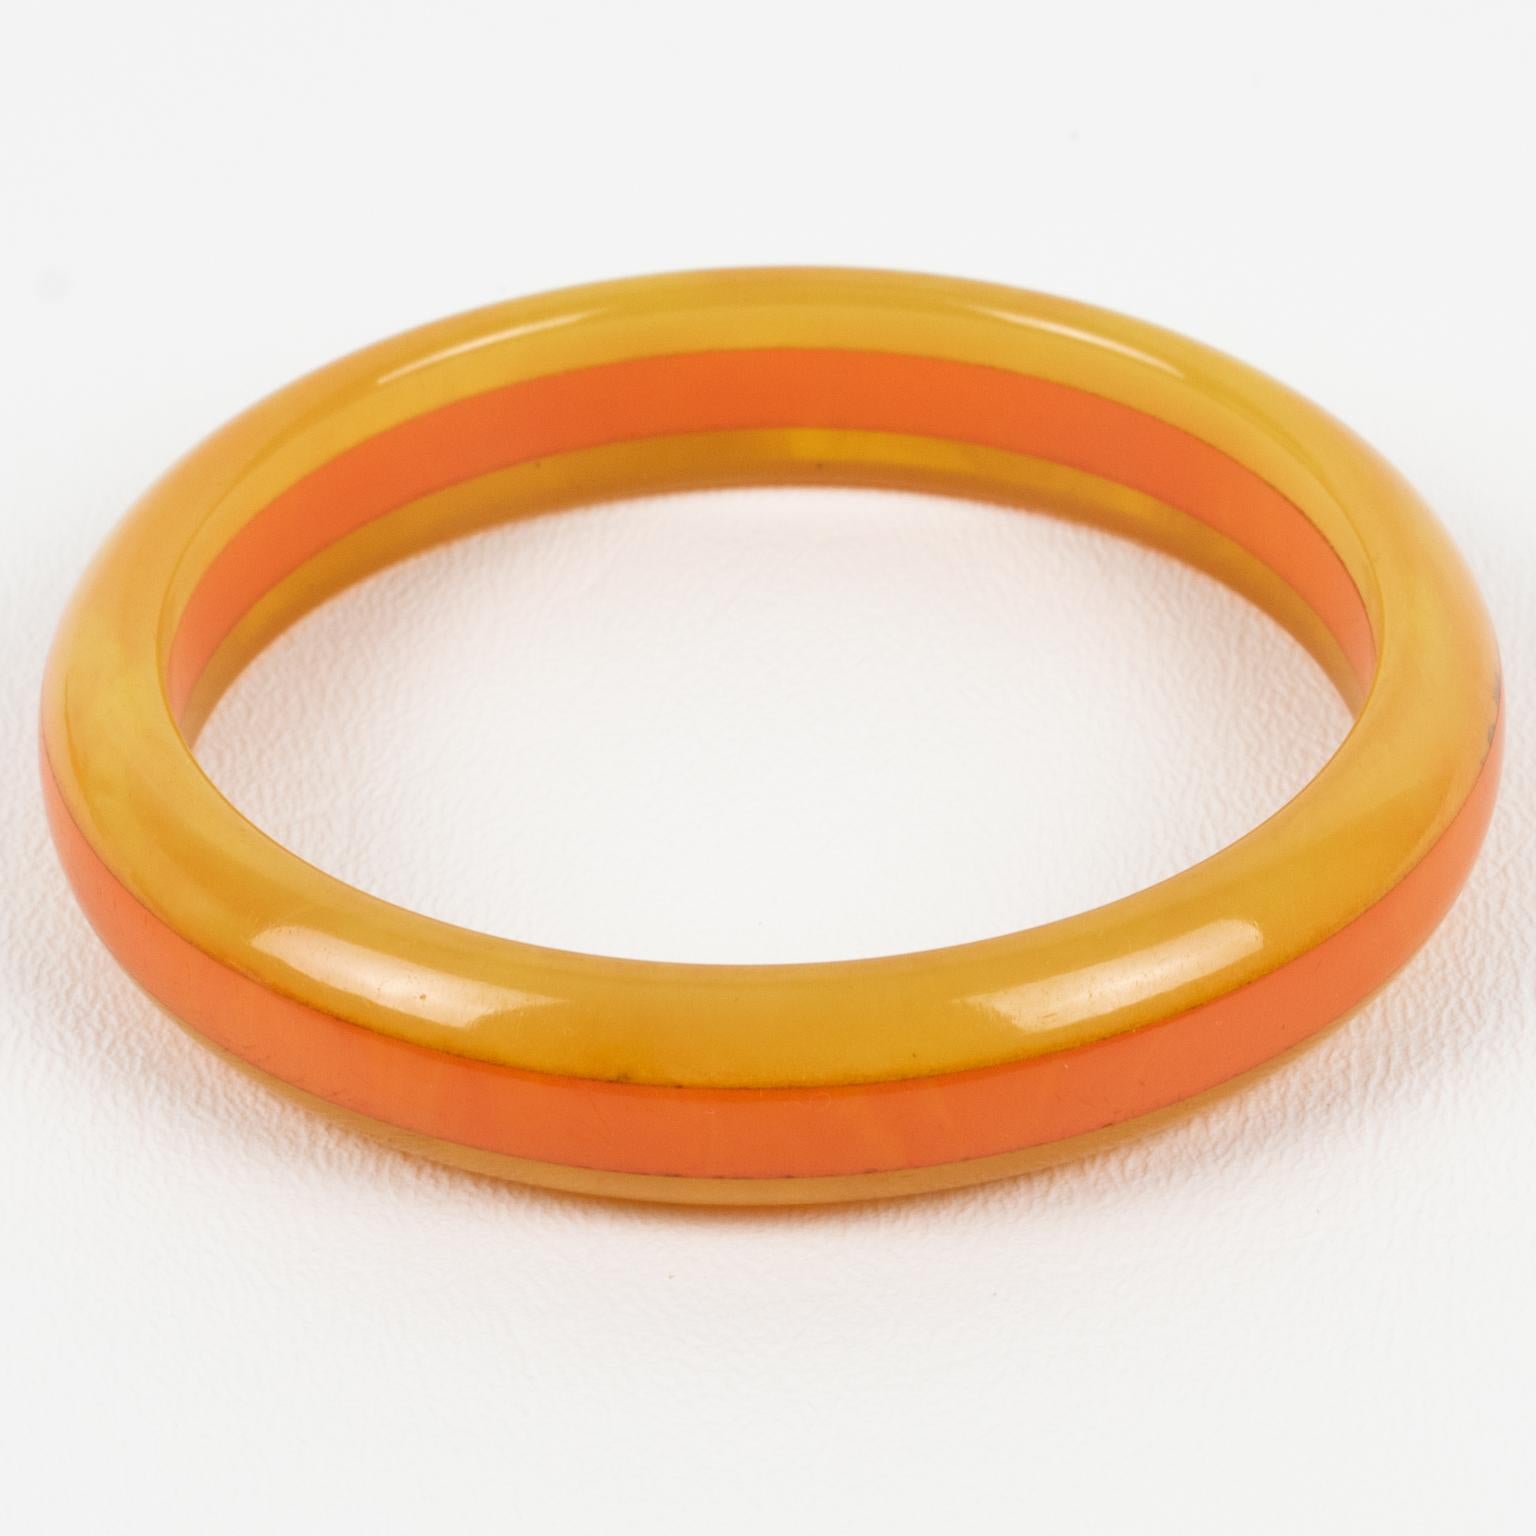 This is a lovely bi-color marble Bakelite laminated bracelet bangle. It features a chunky domed shape with a multi-layer design. The colors are a sunny intense warm orange tone with lighter milky swirling combined with a warm yellow curry marble